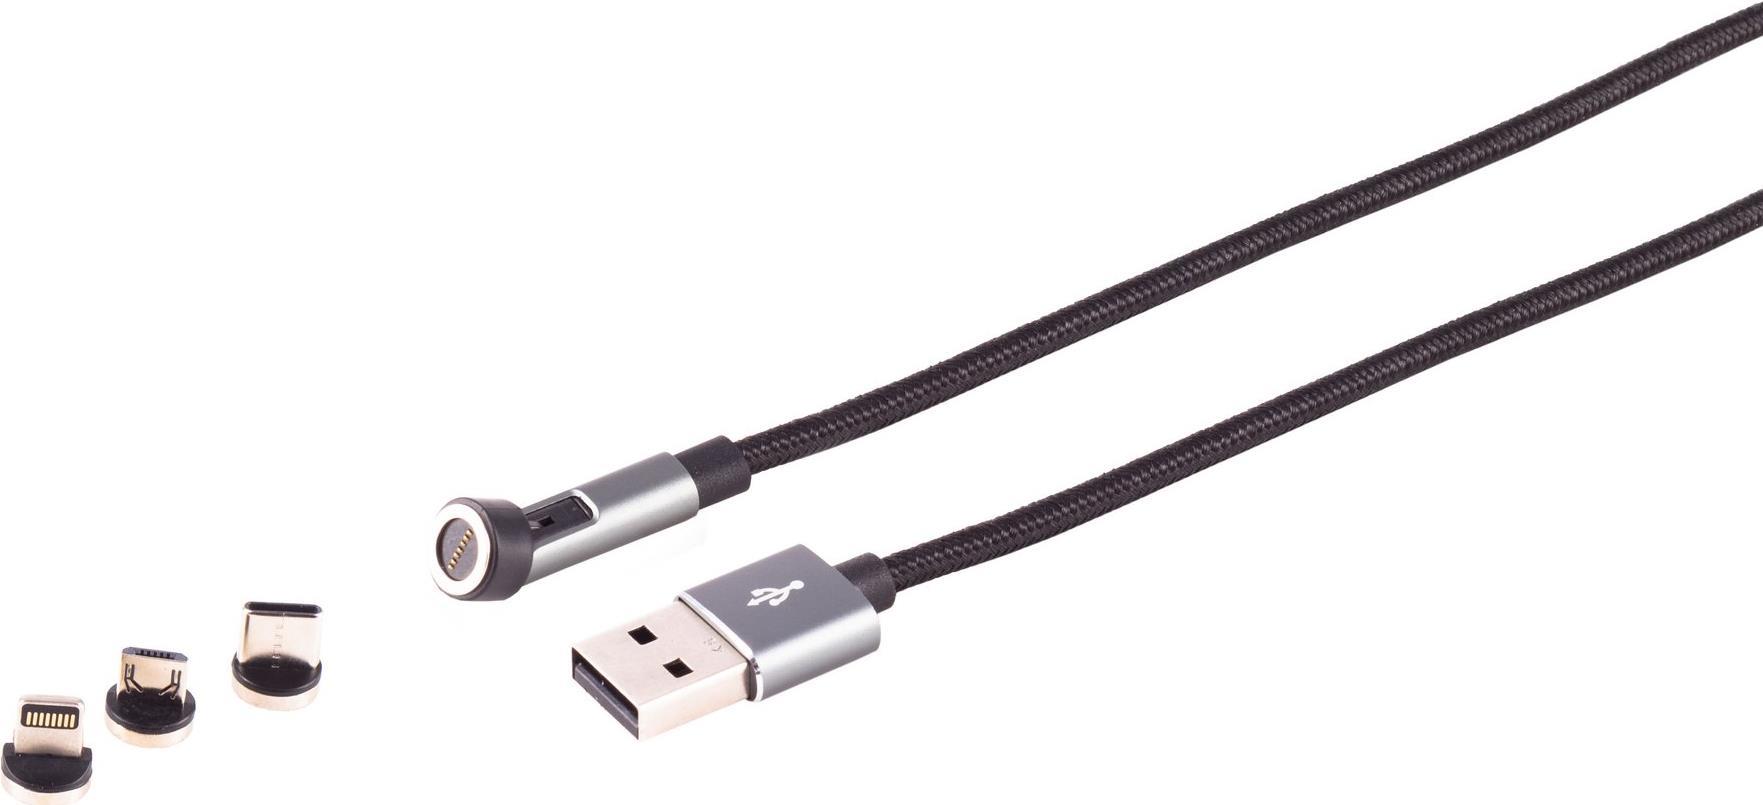 S/CONN maximum connectivity Universal--USB-A Magnetkabel, 3in1, 540°, 7-Pin, weiß, 2,0m (14-19011)